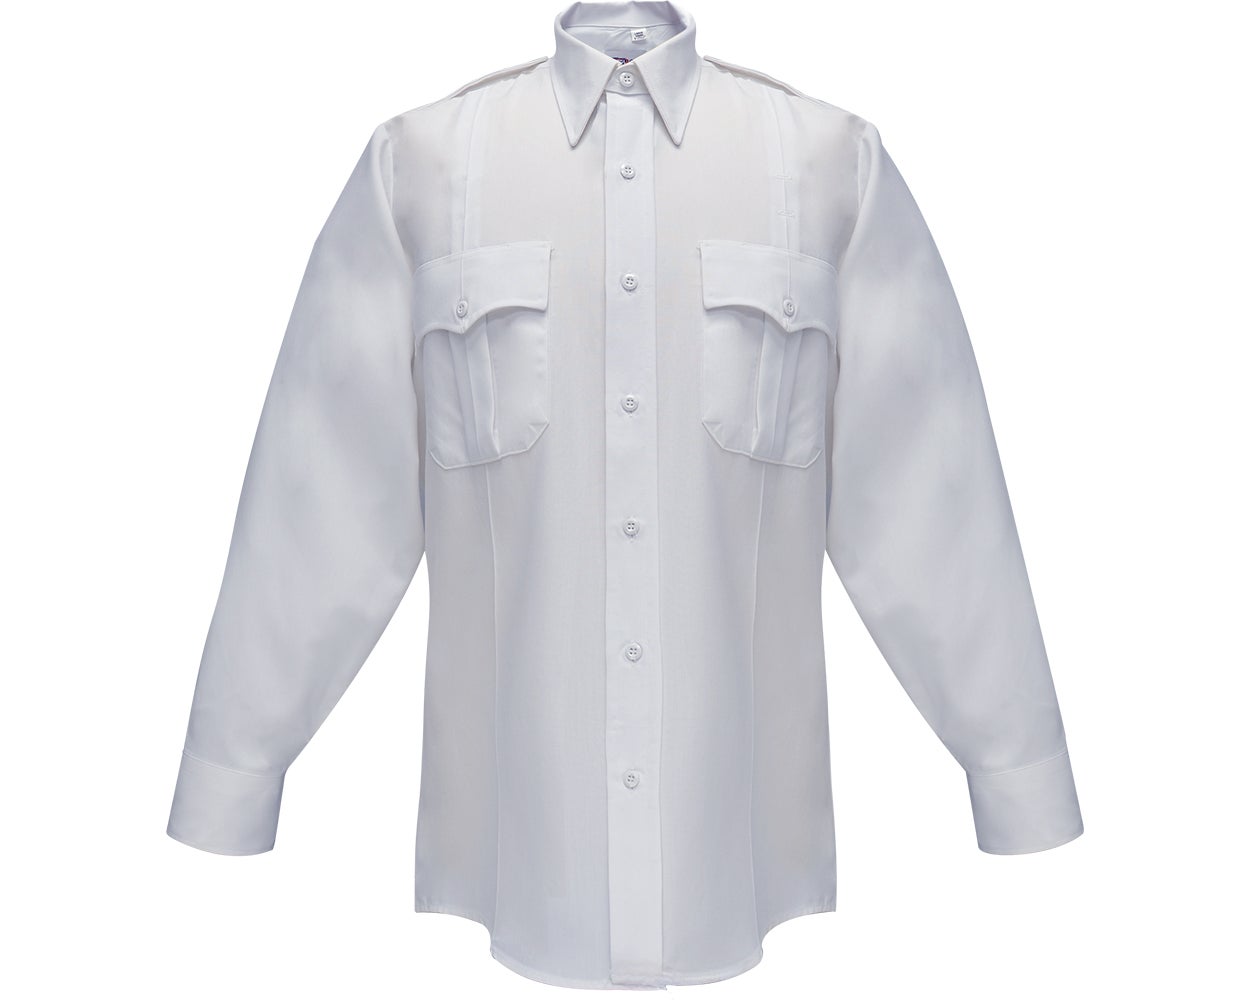 Flying Cross Duro Poplin Poly/Cotton Men's Long Sleeve Uniform Shirt with Sewn-In Creases 35W54 - White, 19-19.5 x 34